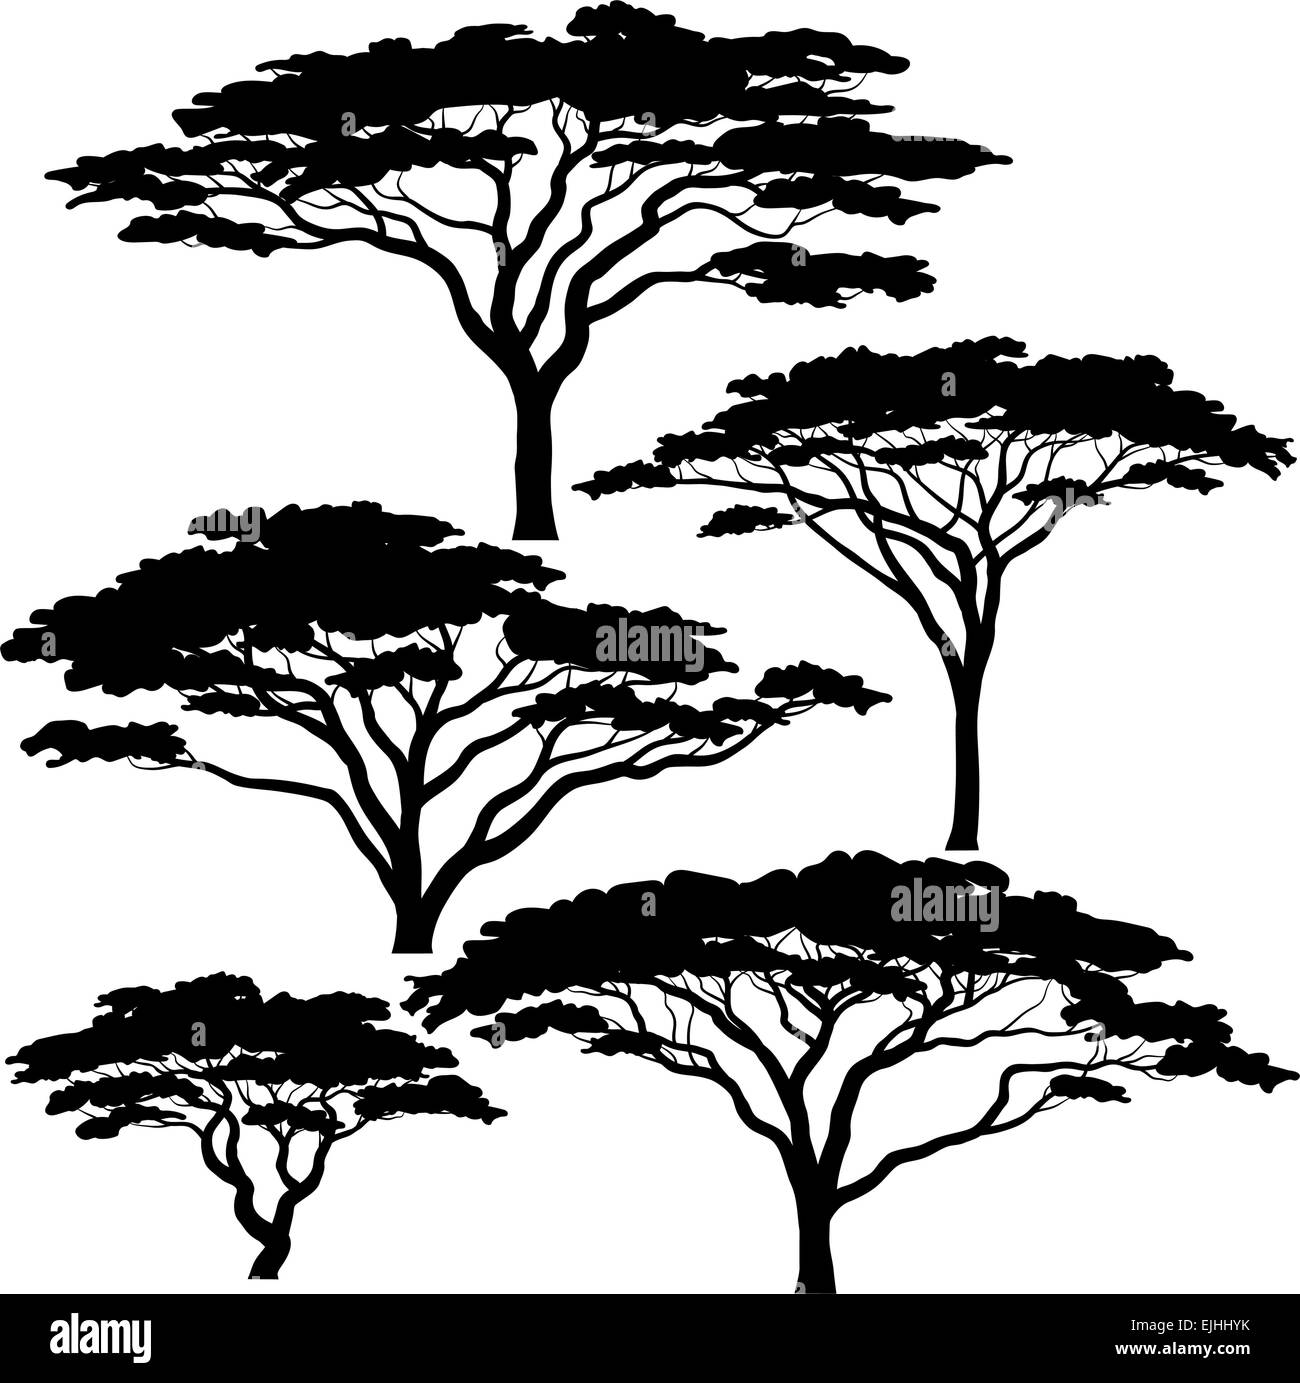 Set of eps8 editable vector silhouettes of acacia trees Stock Vector